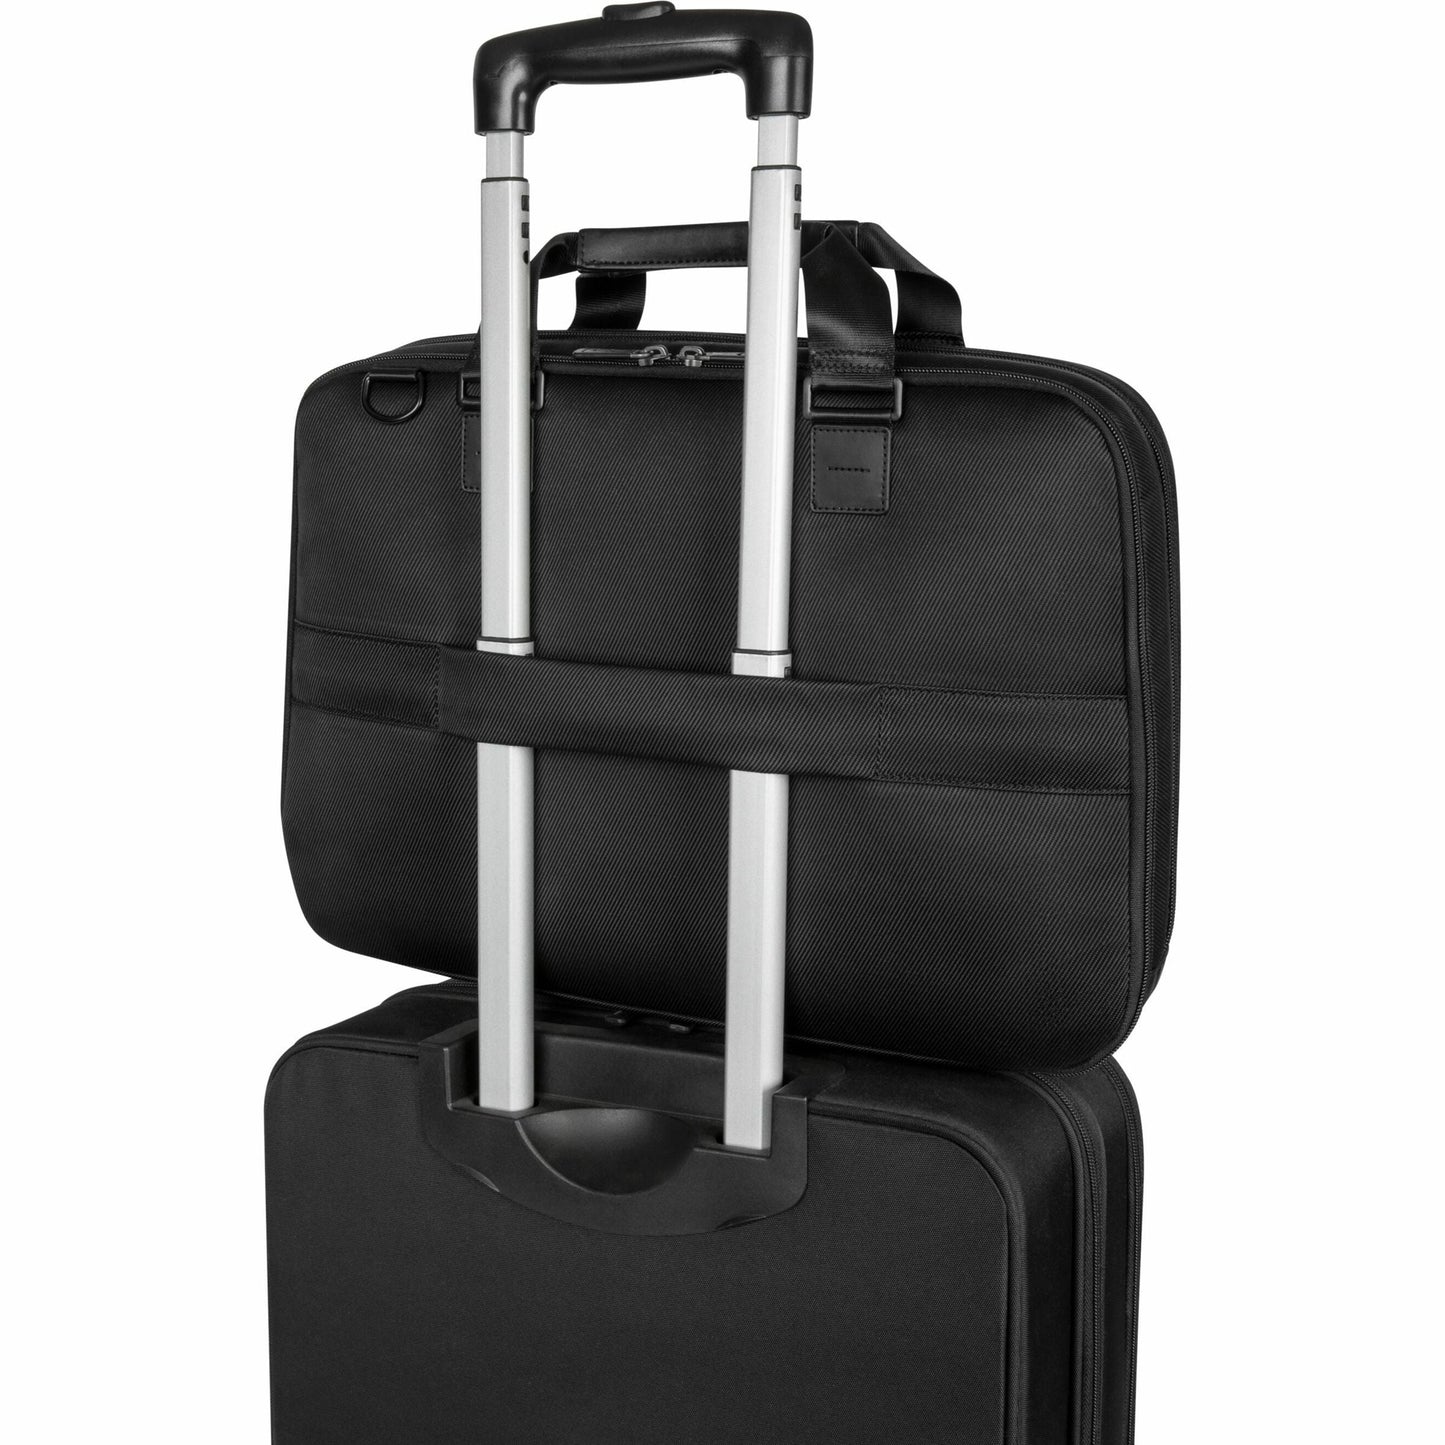 Targus Mobile Elite TBT045US Carrying Case (Briefcase) for 15" to 16" Notebook - Black Gray